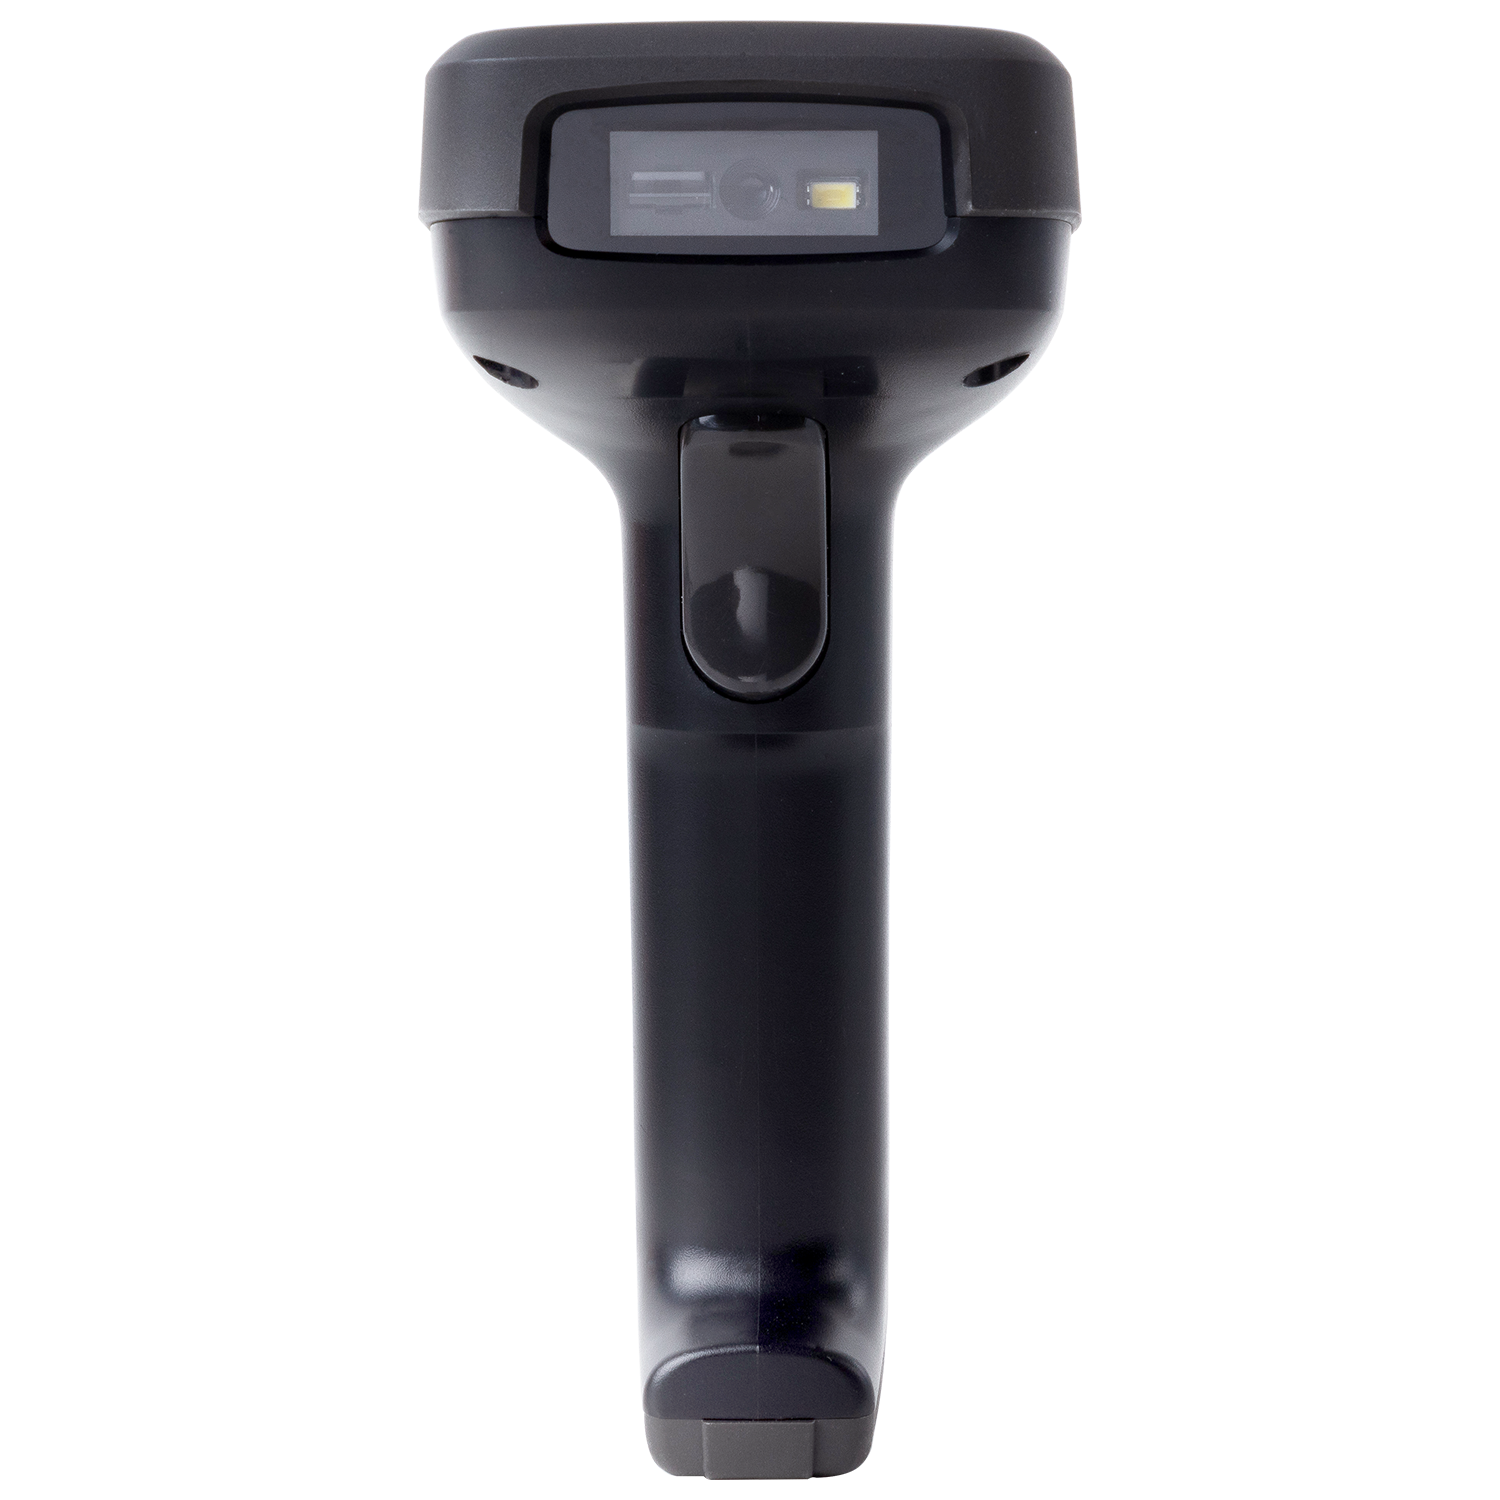 E14952 Handheld Barcode Scanner Picture(s)